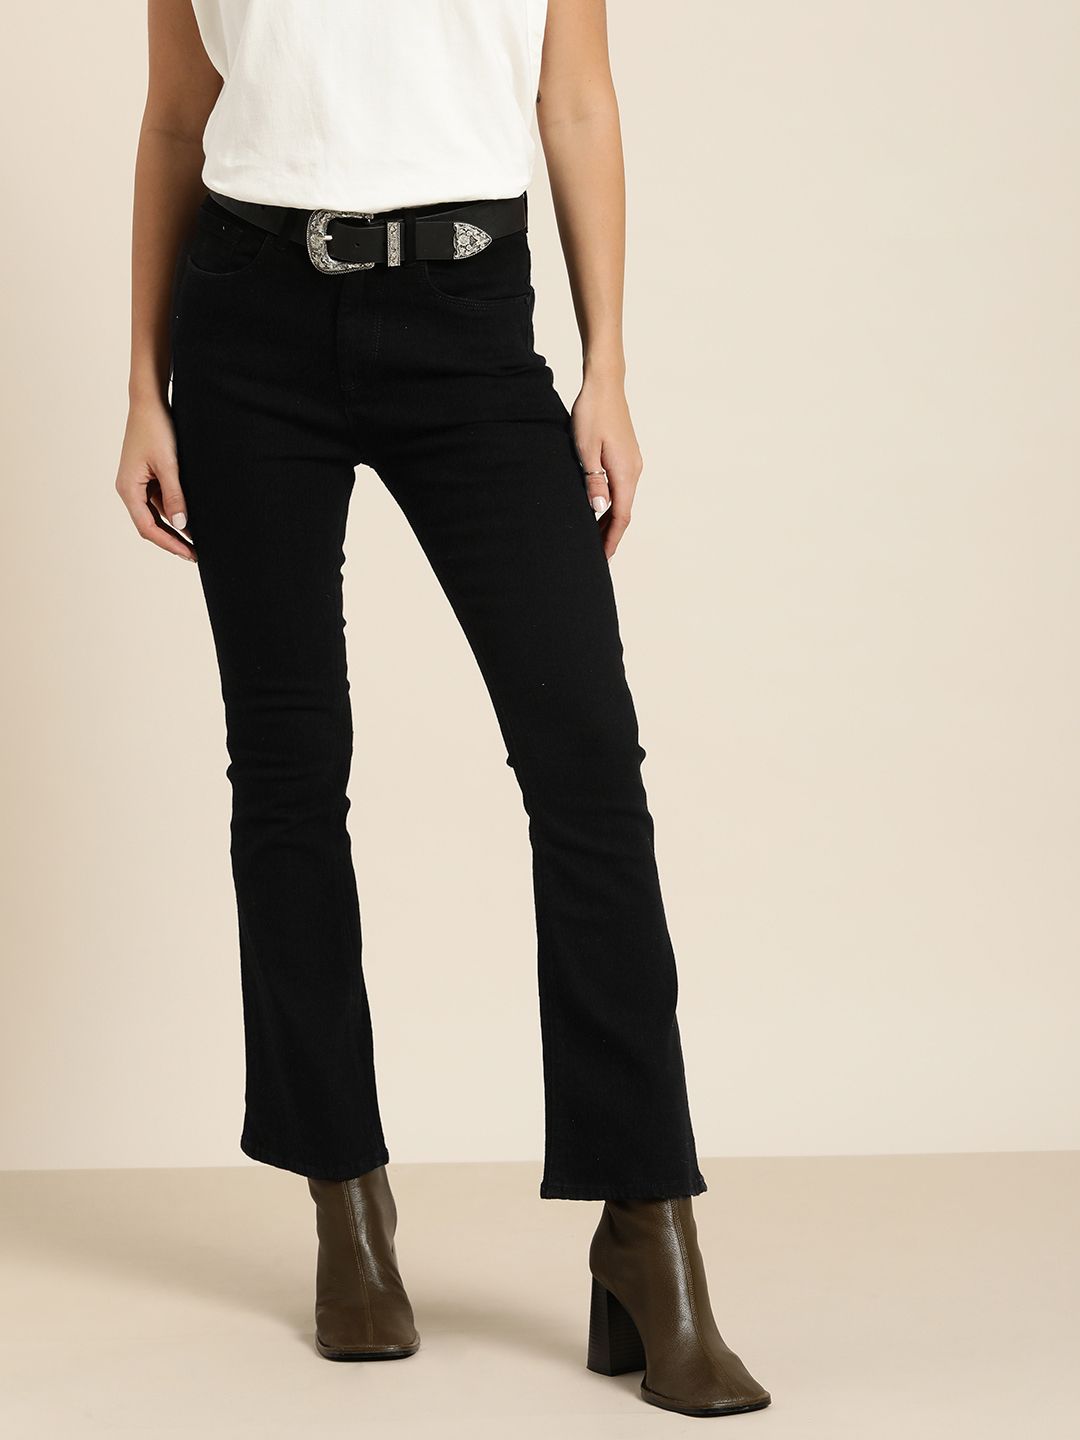 Moda Rapido Women Black Bootcut High-Rise Stretchable Jeans Price in India